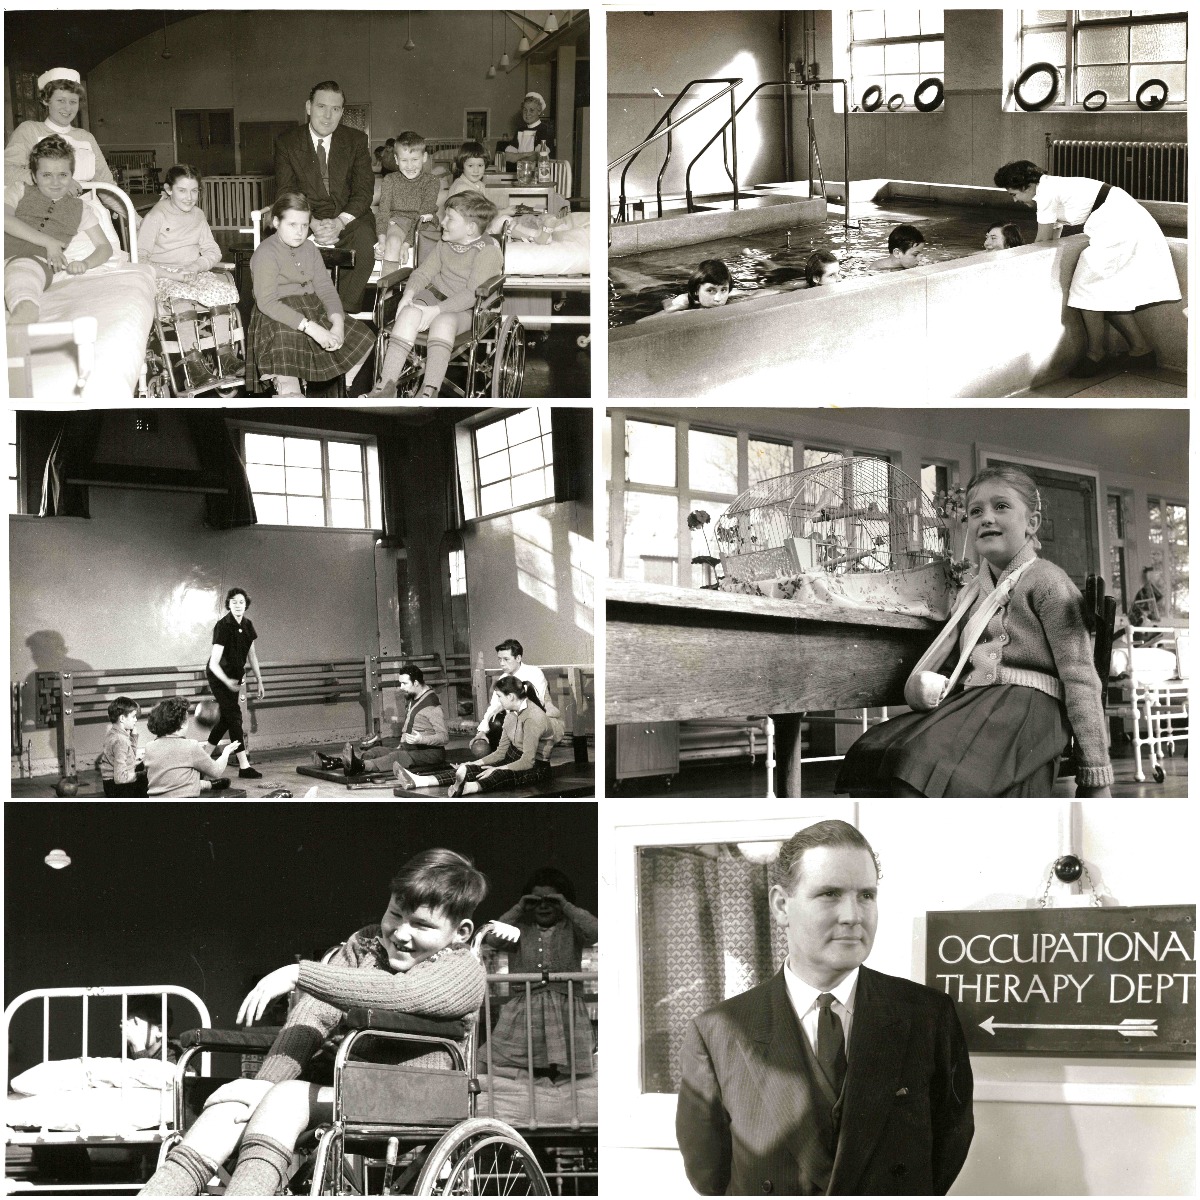 Collage of 1959 polio treatment images